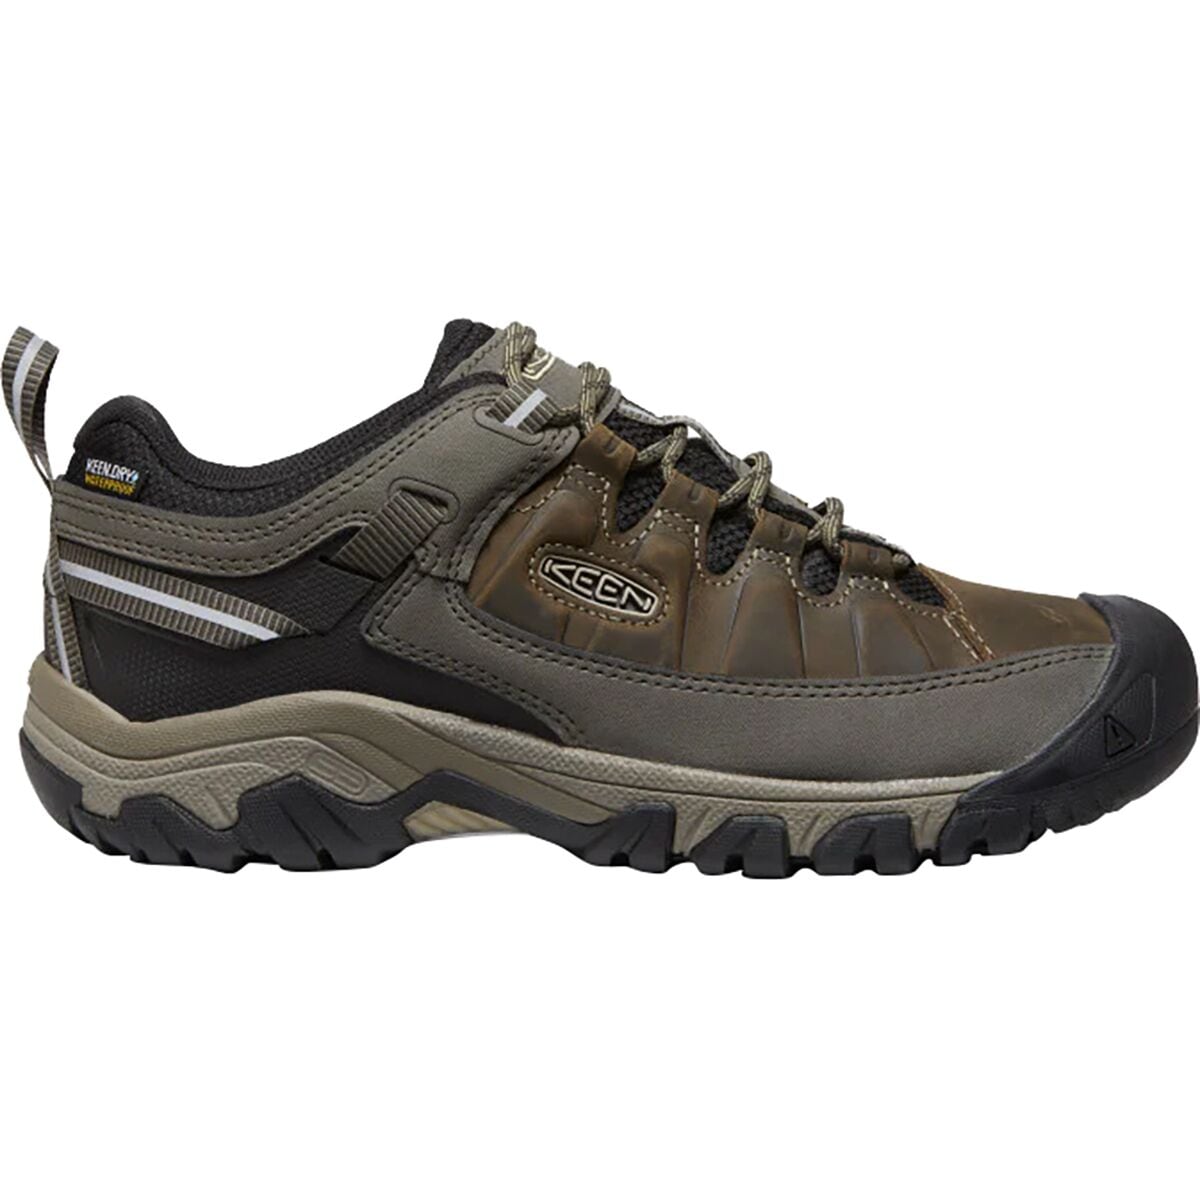 KEEN hiking boots and shoes: how good are they? 